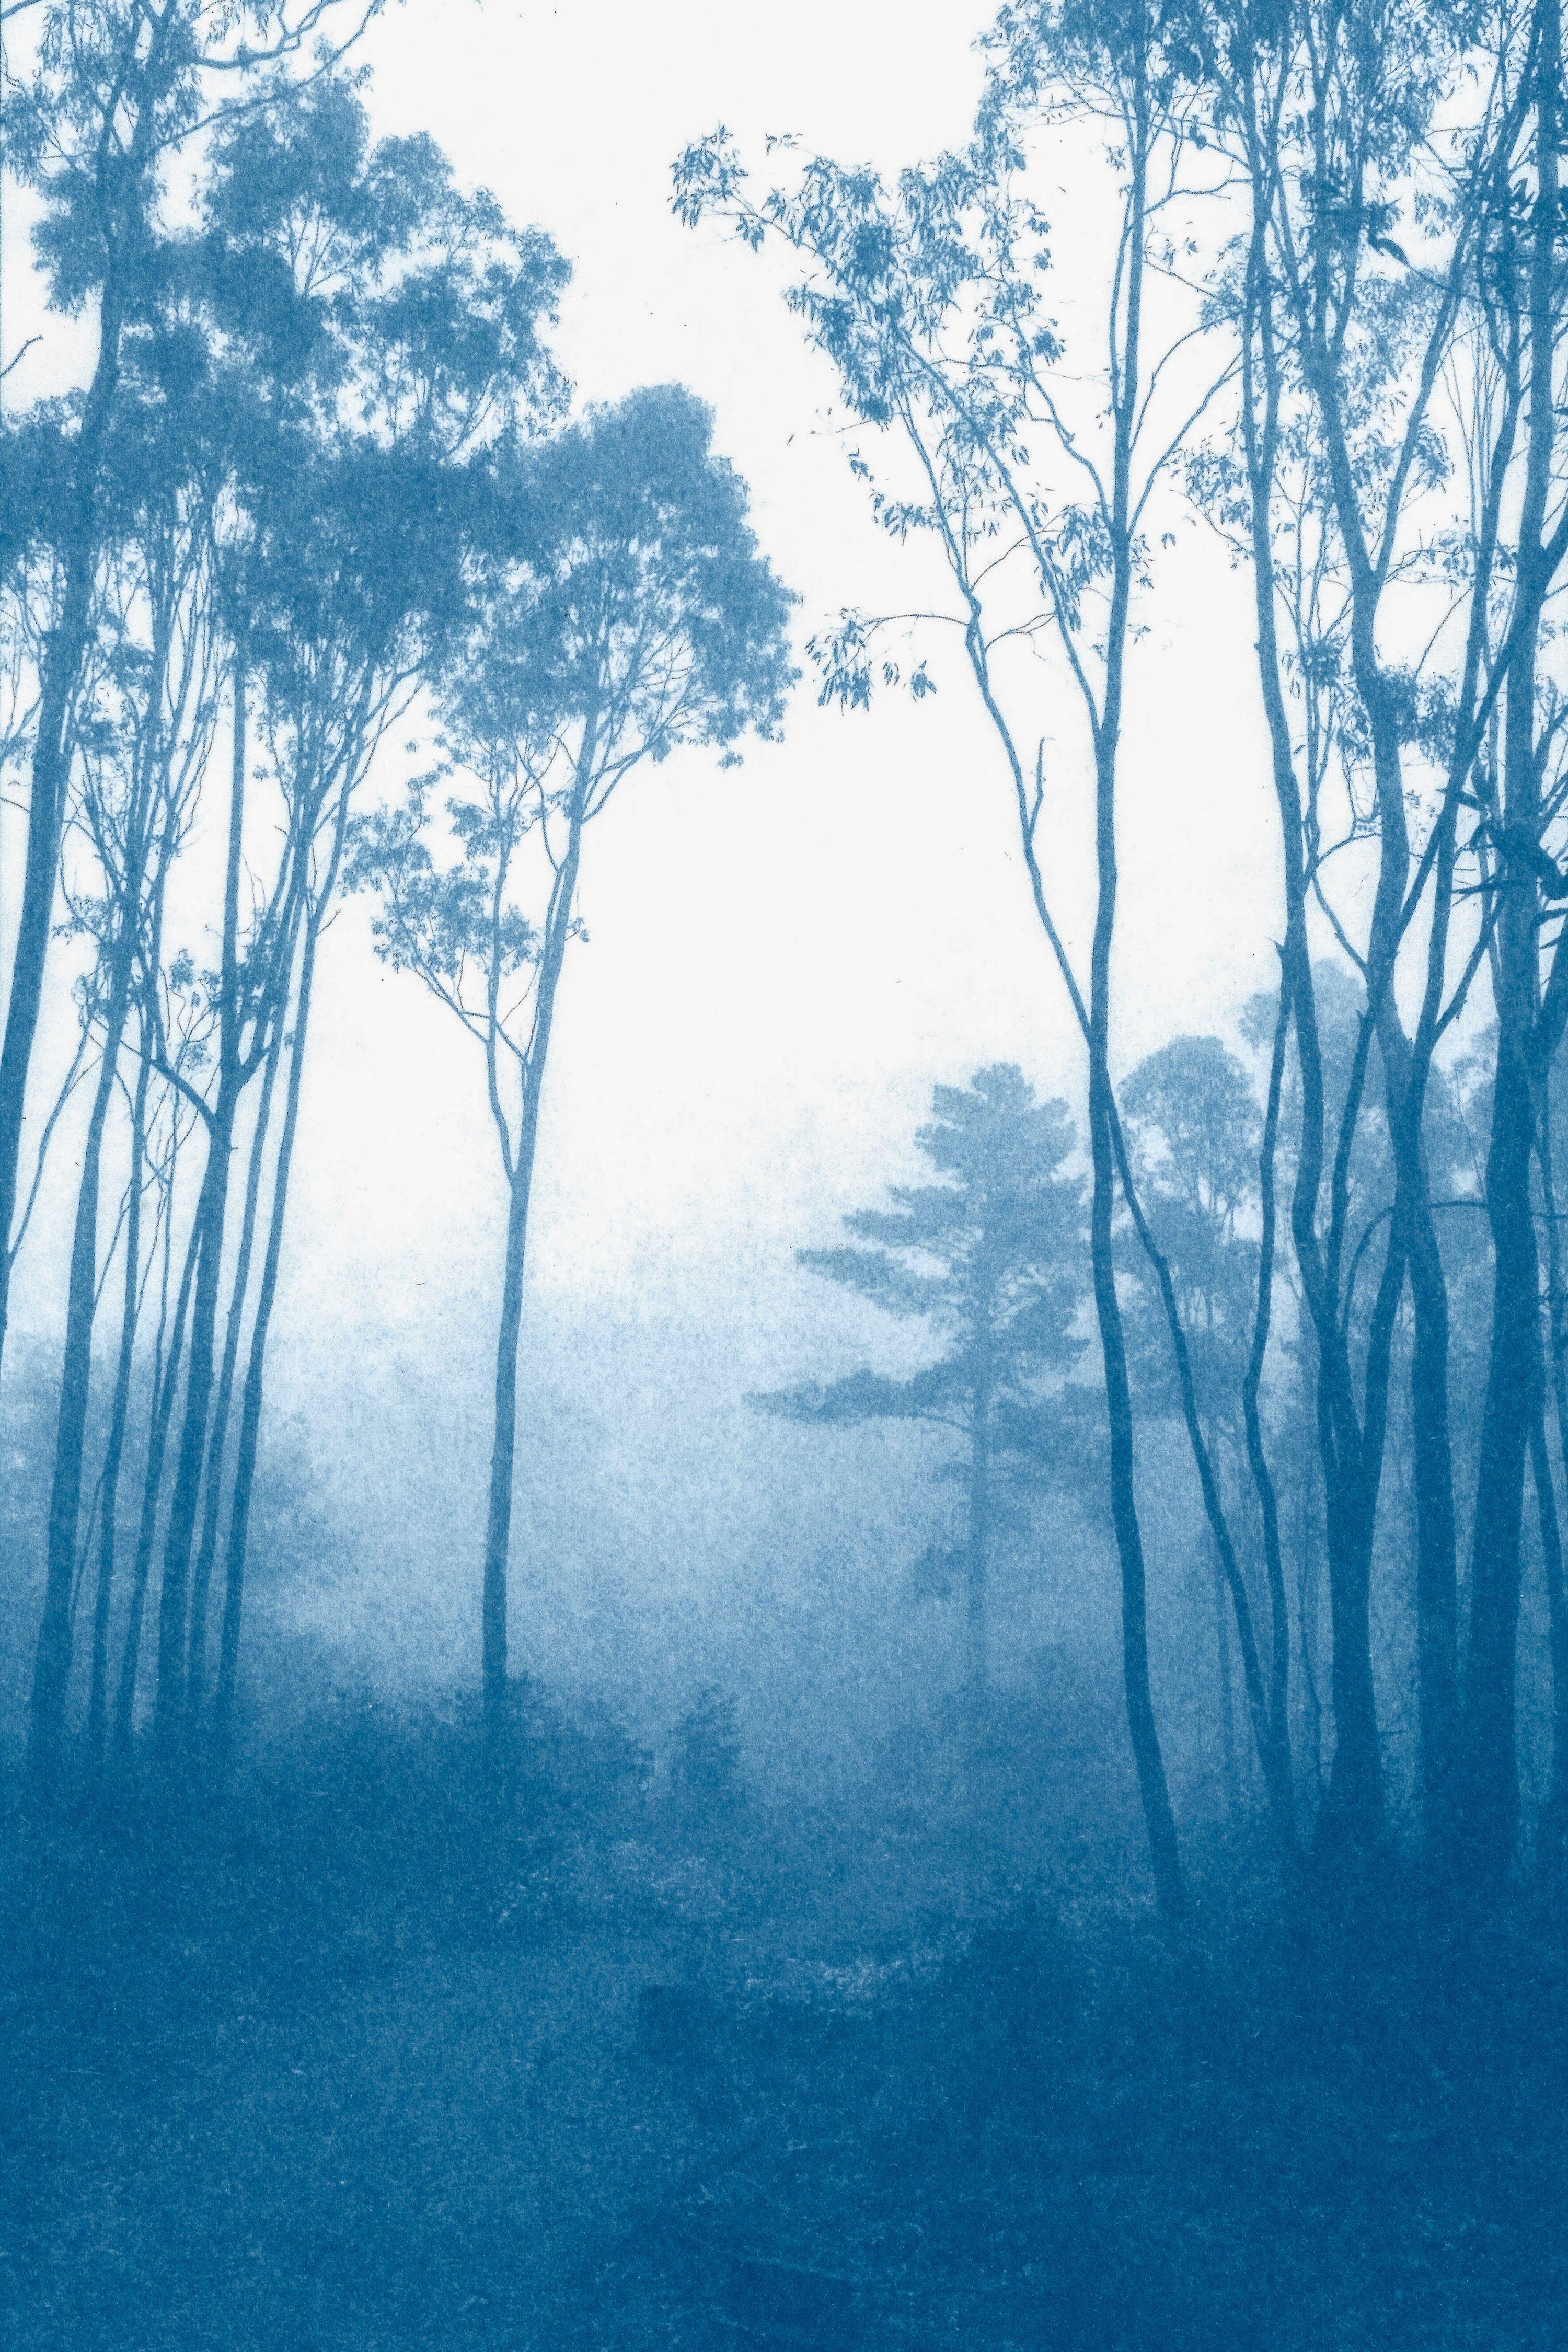 The Journey's End  (Framed hand-printed cyanotype: 24 x 36 inches)